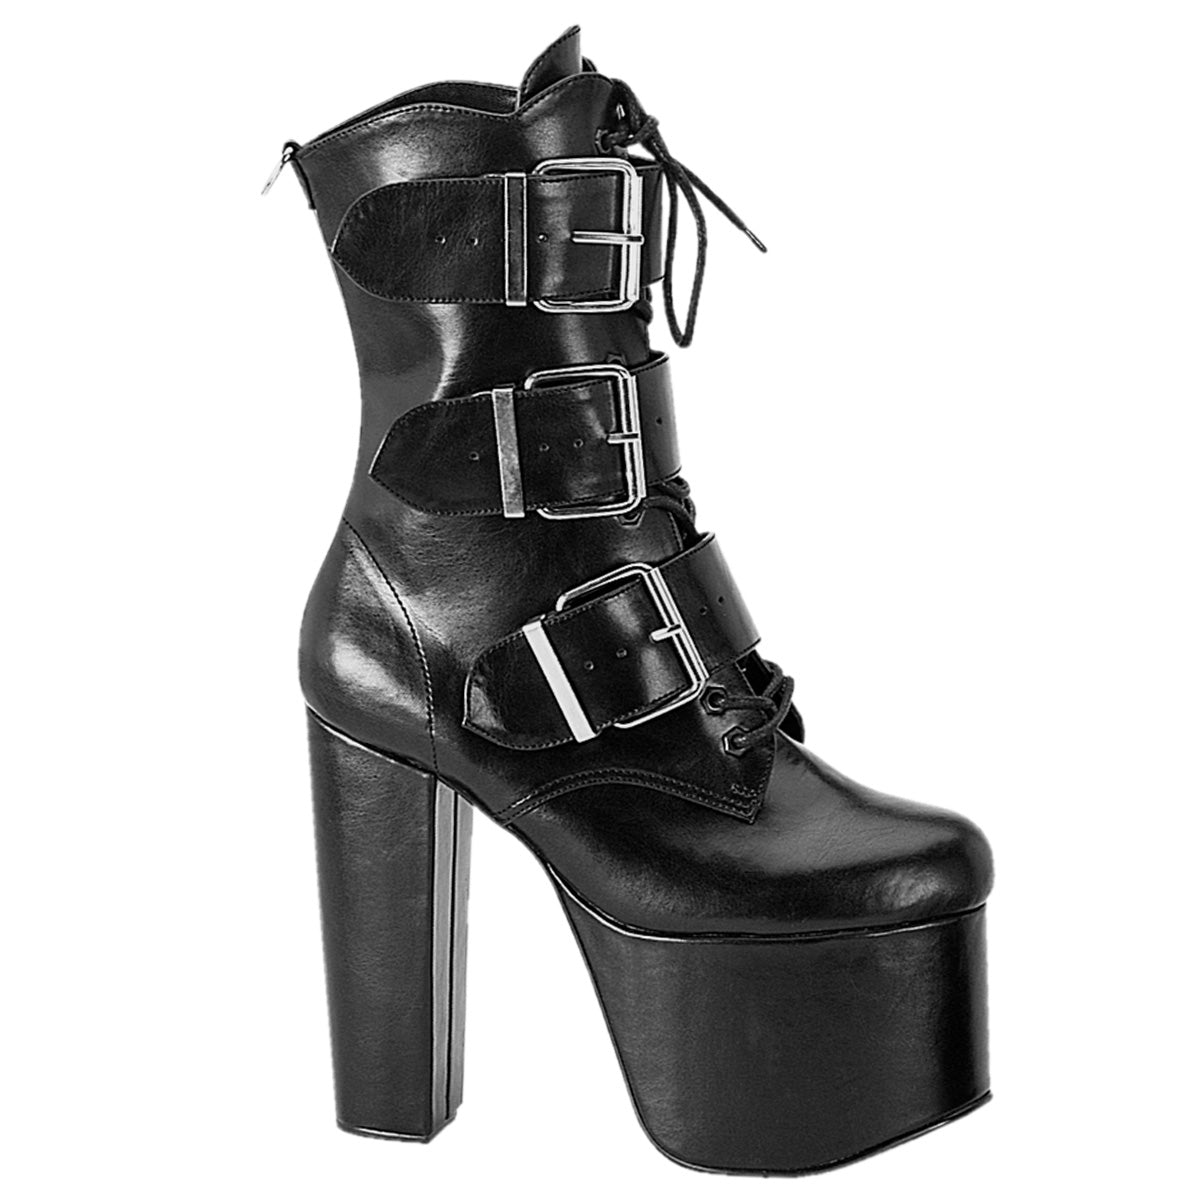 DemoniaCult TORMENT 703 Platform Boots - From DemoniaCult Sold By Alternative Footwear